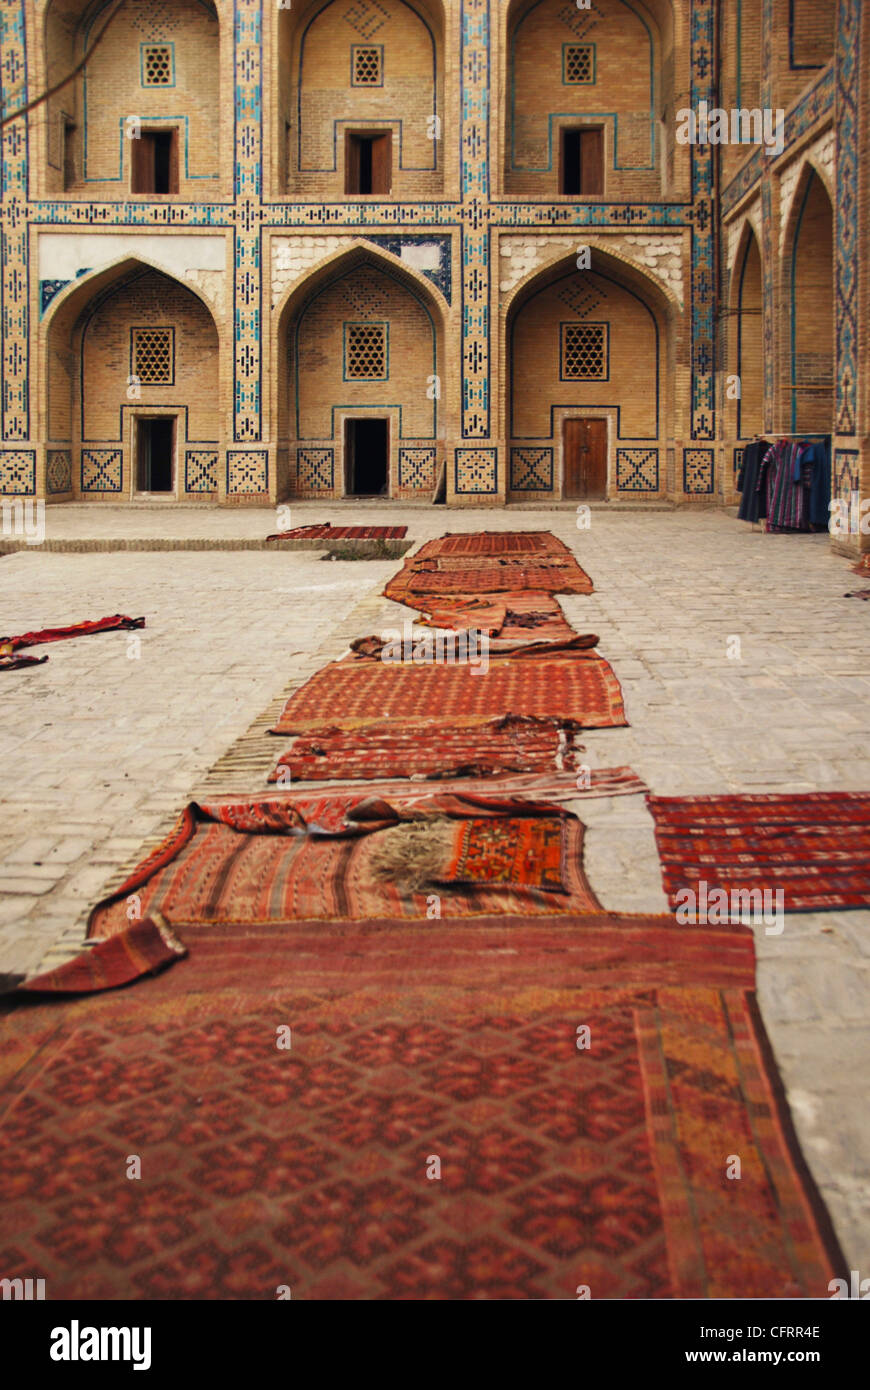 Uzbekistan, Bukhara, arched entrance in a row of historic building with carpets lying on courtyard Stock Photo